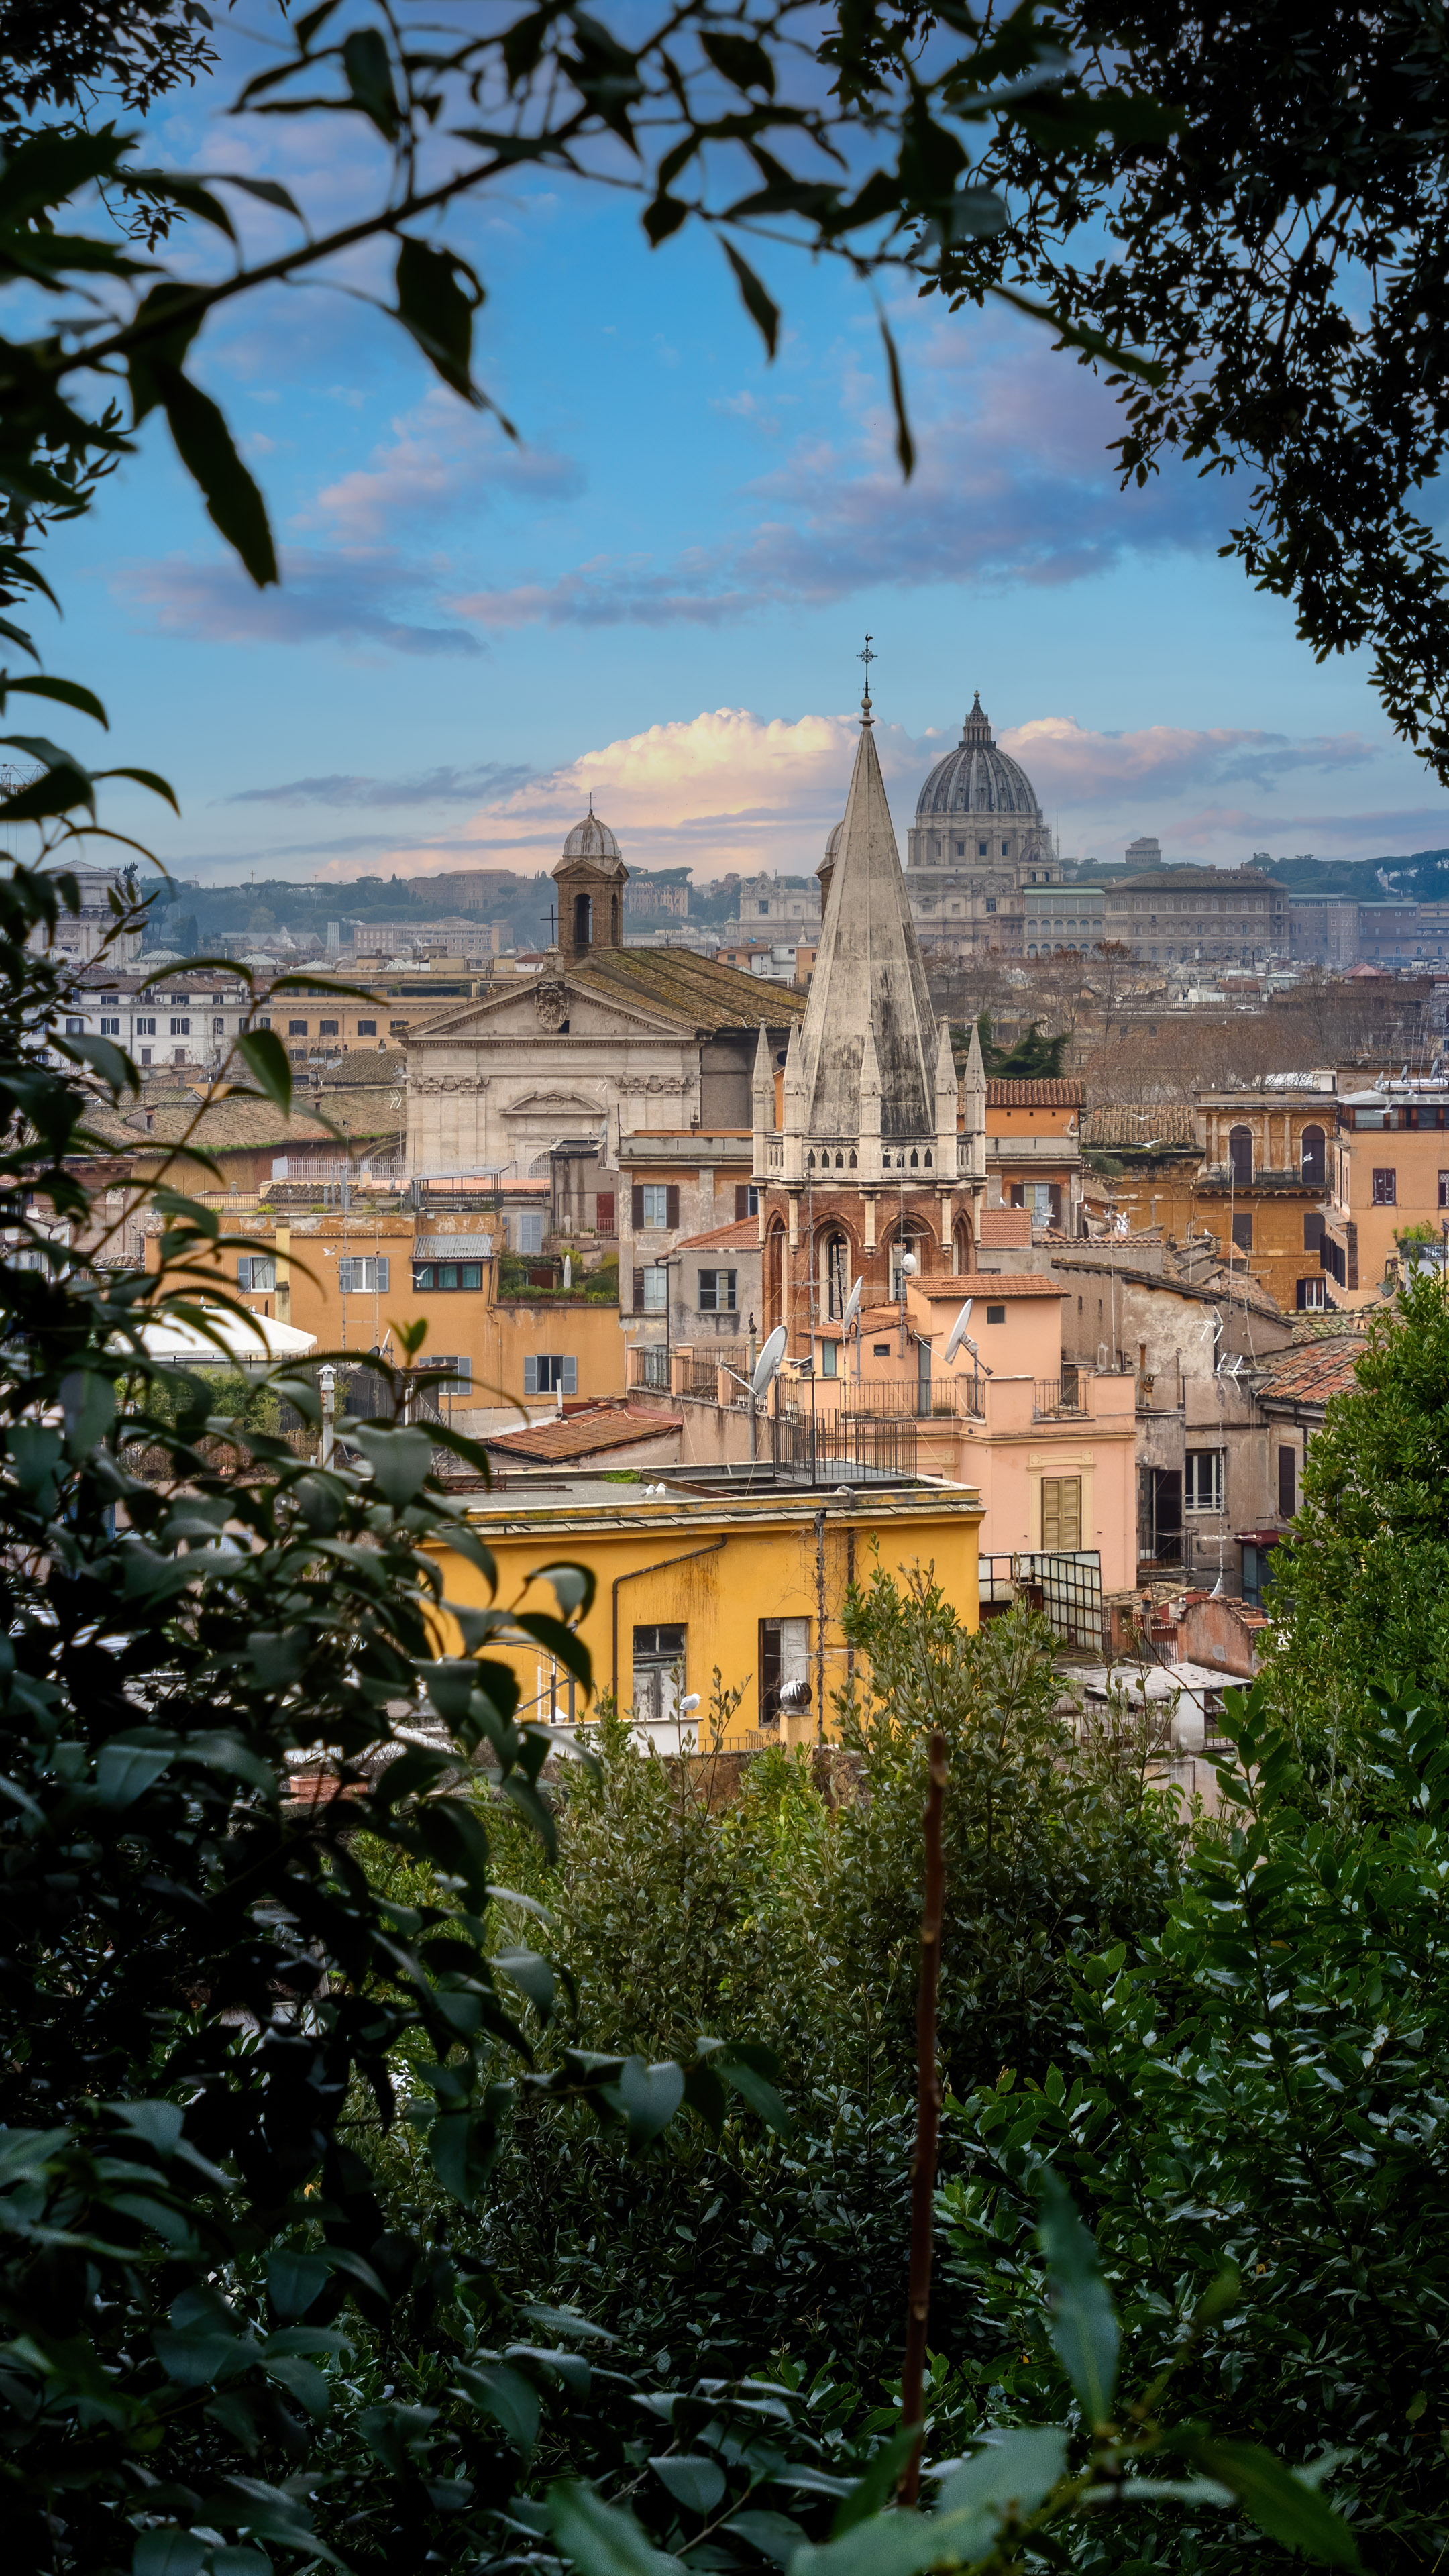 Fall in love with the stunning HD wallpaper of Rome's skyline, with iconic landmarks like St. Peter's Basilica.